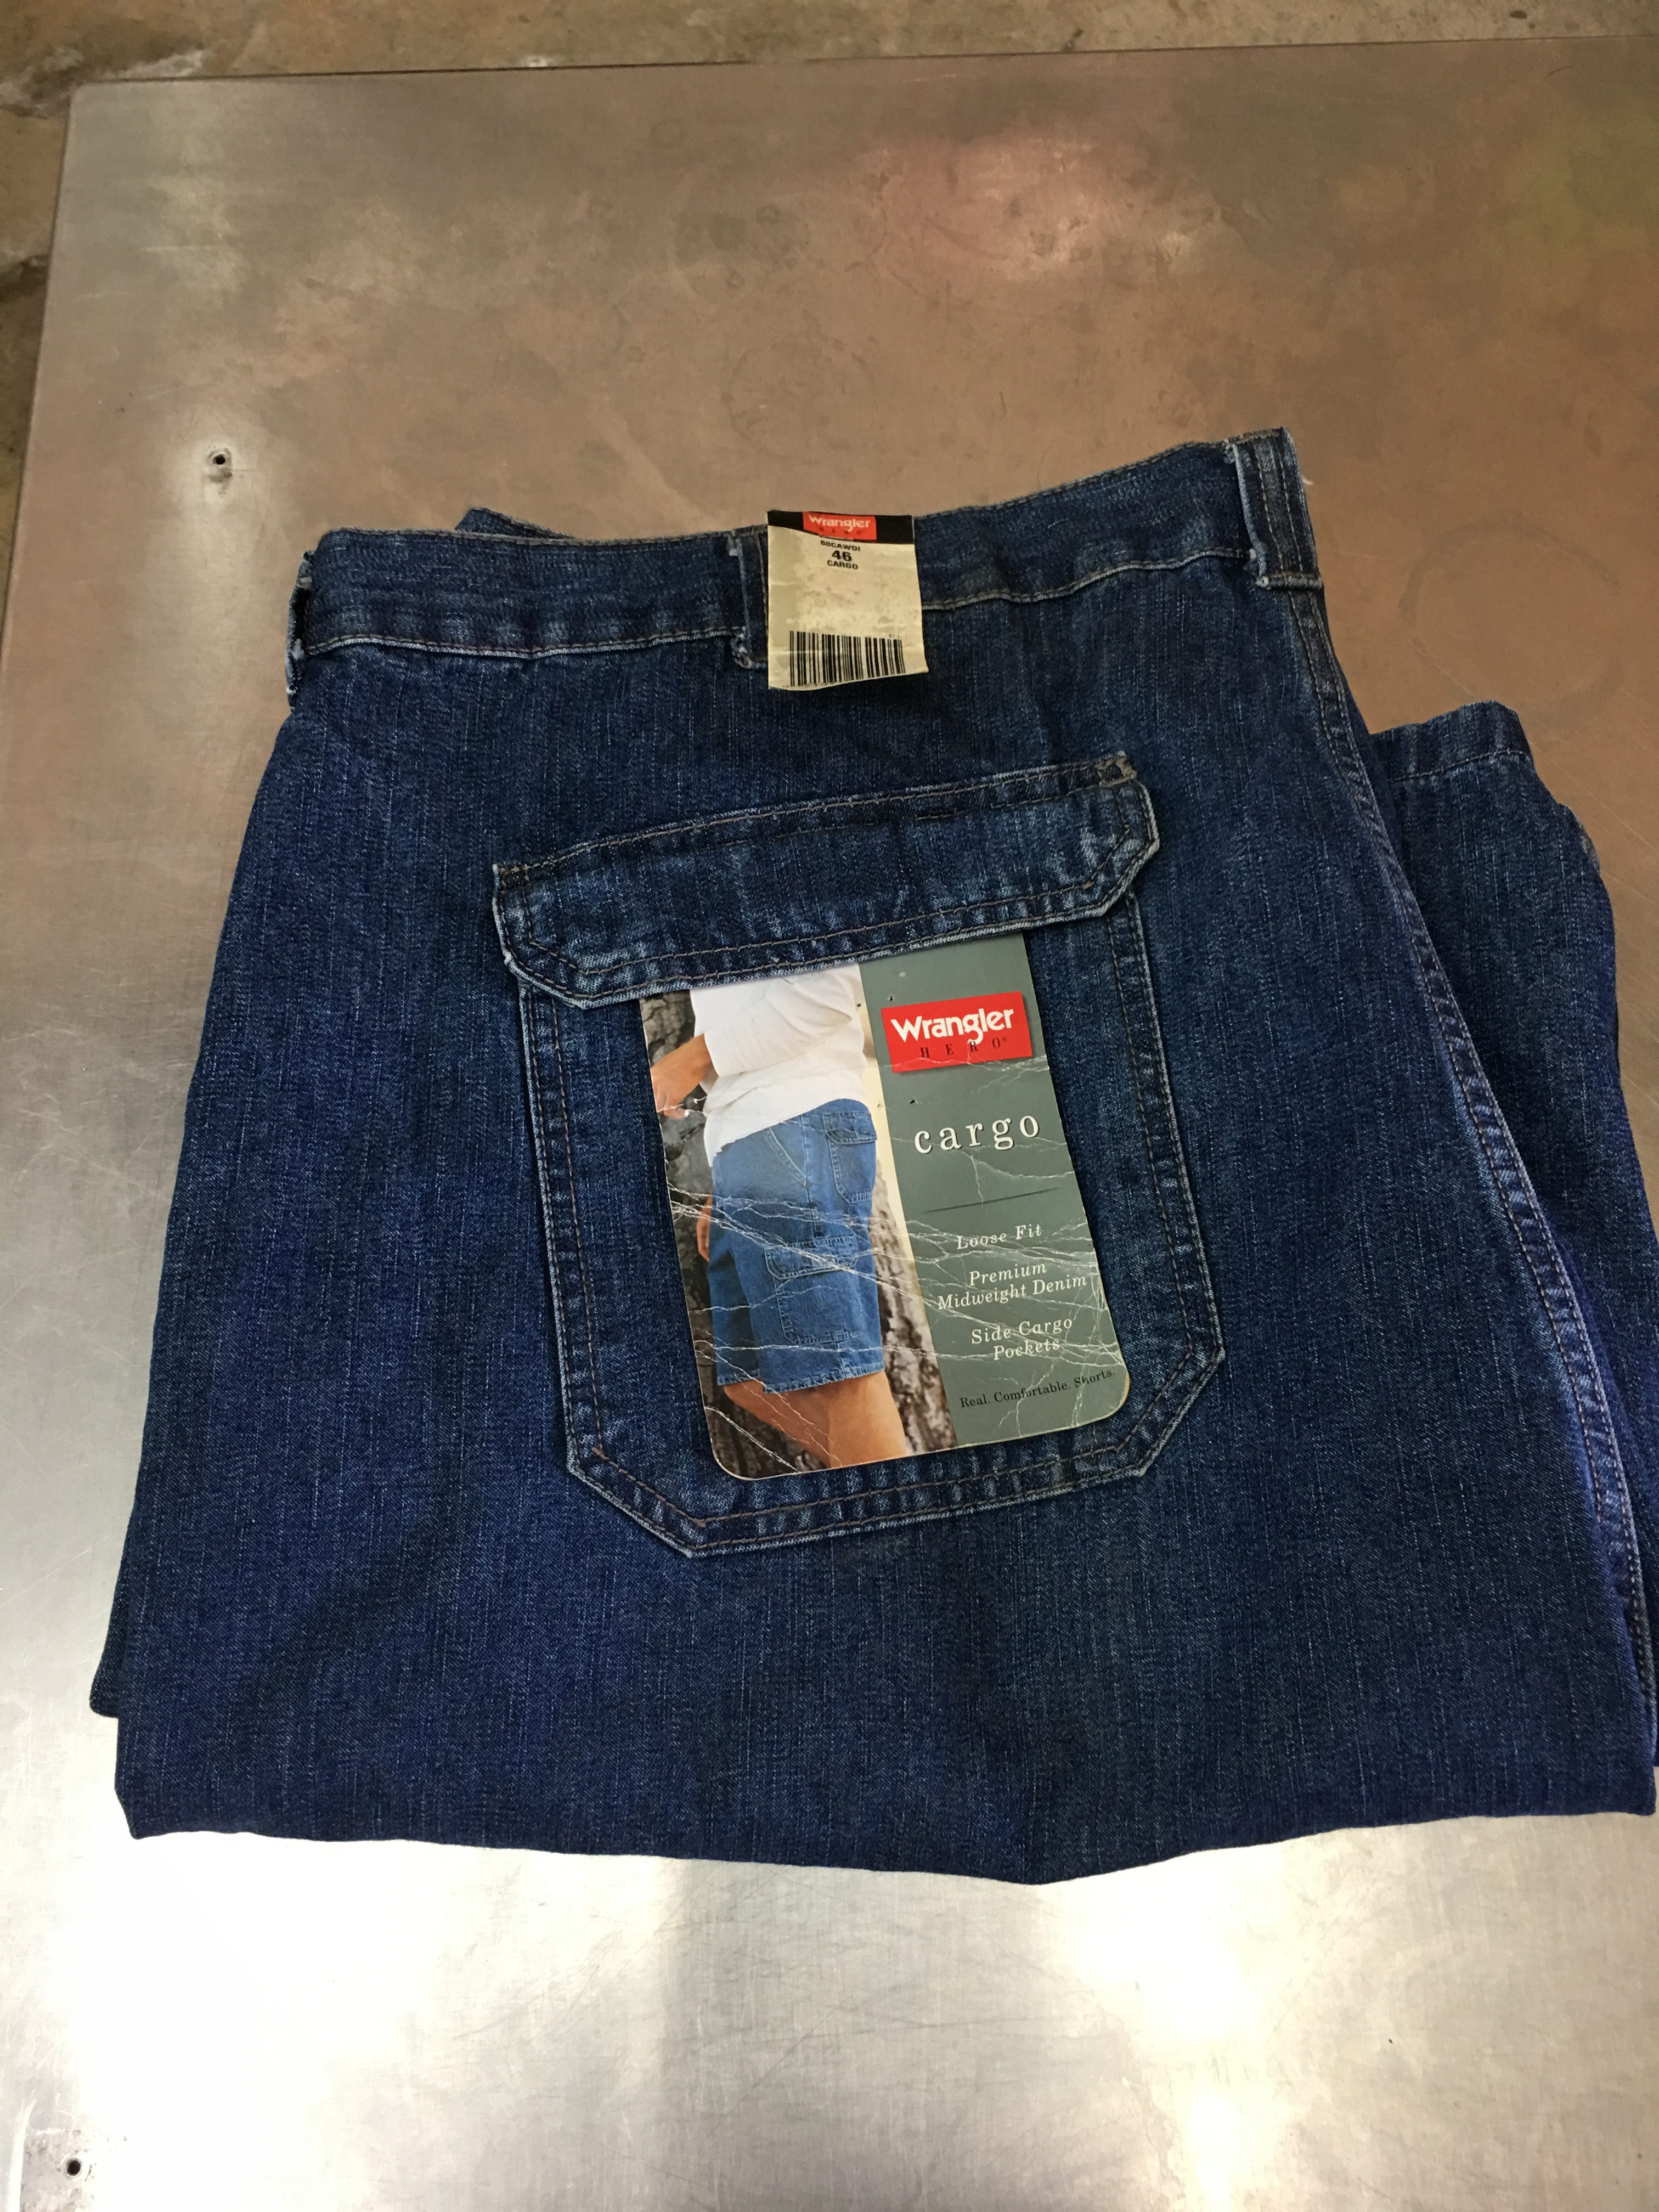 levis 218 straight fit